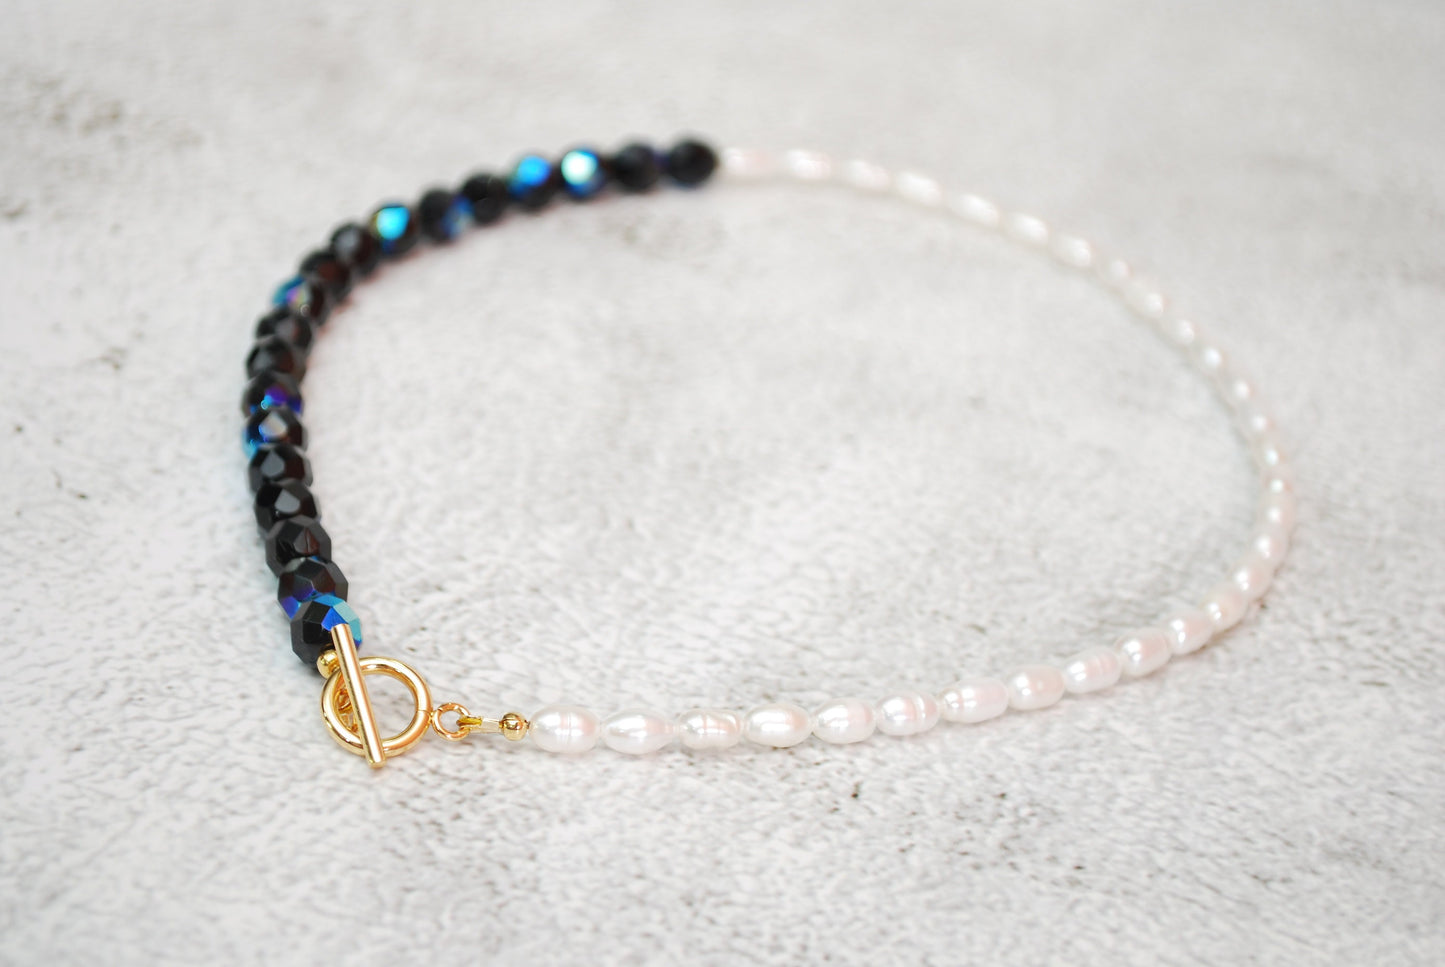 Back and white necklace, half freshwater pearl & half black glass beads choker, elegant jewelry  42cm 17"